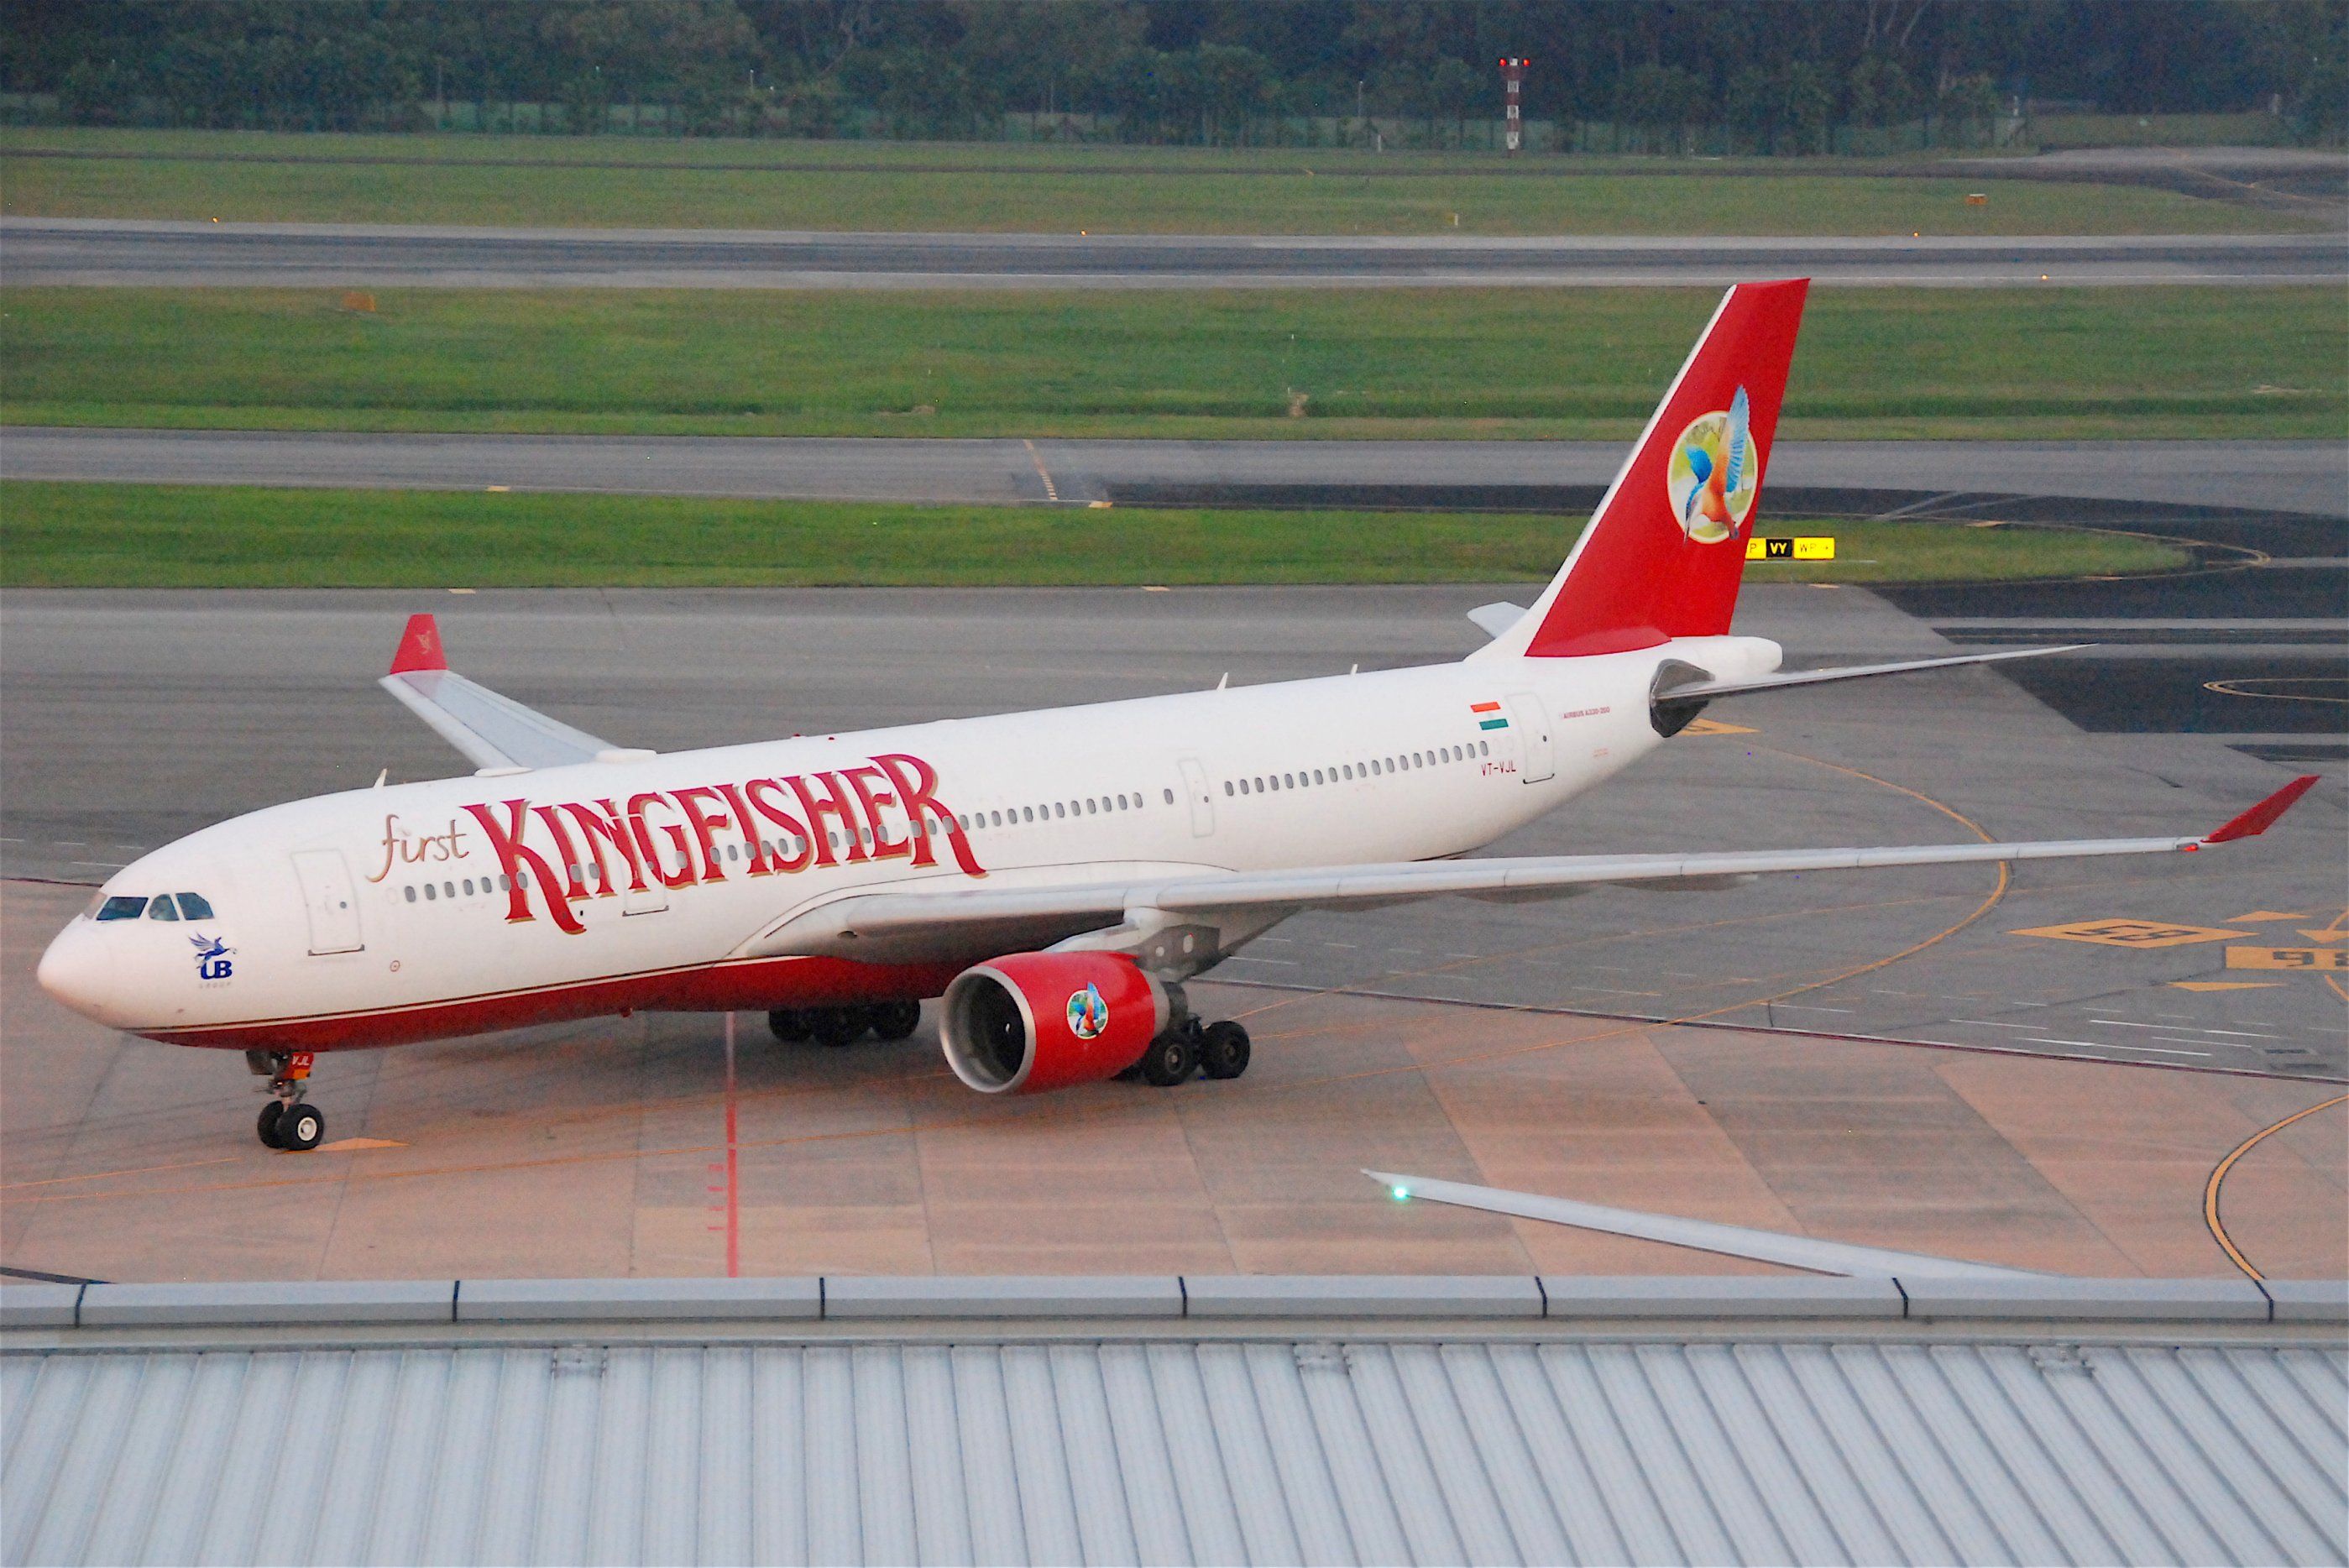 A Kingfisher aircraft on an airport apron.